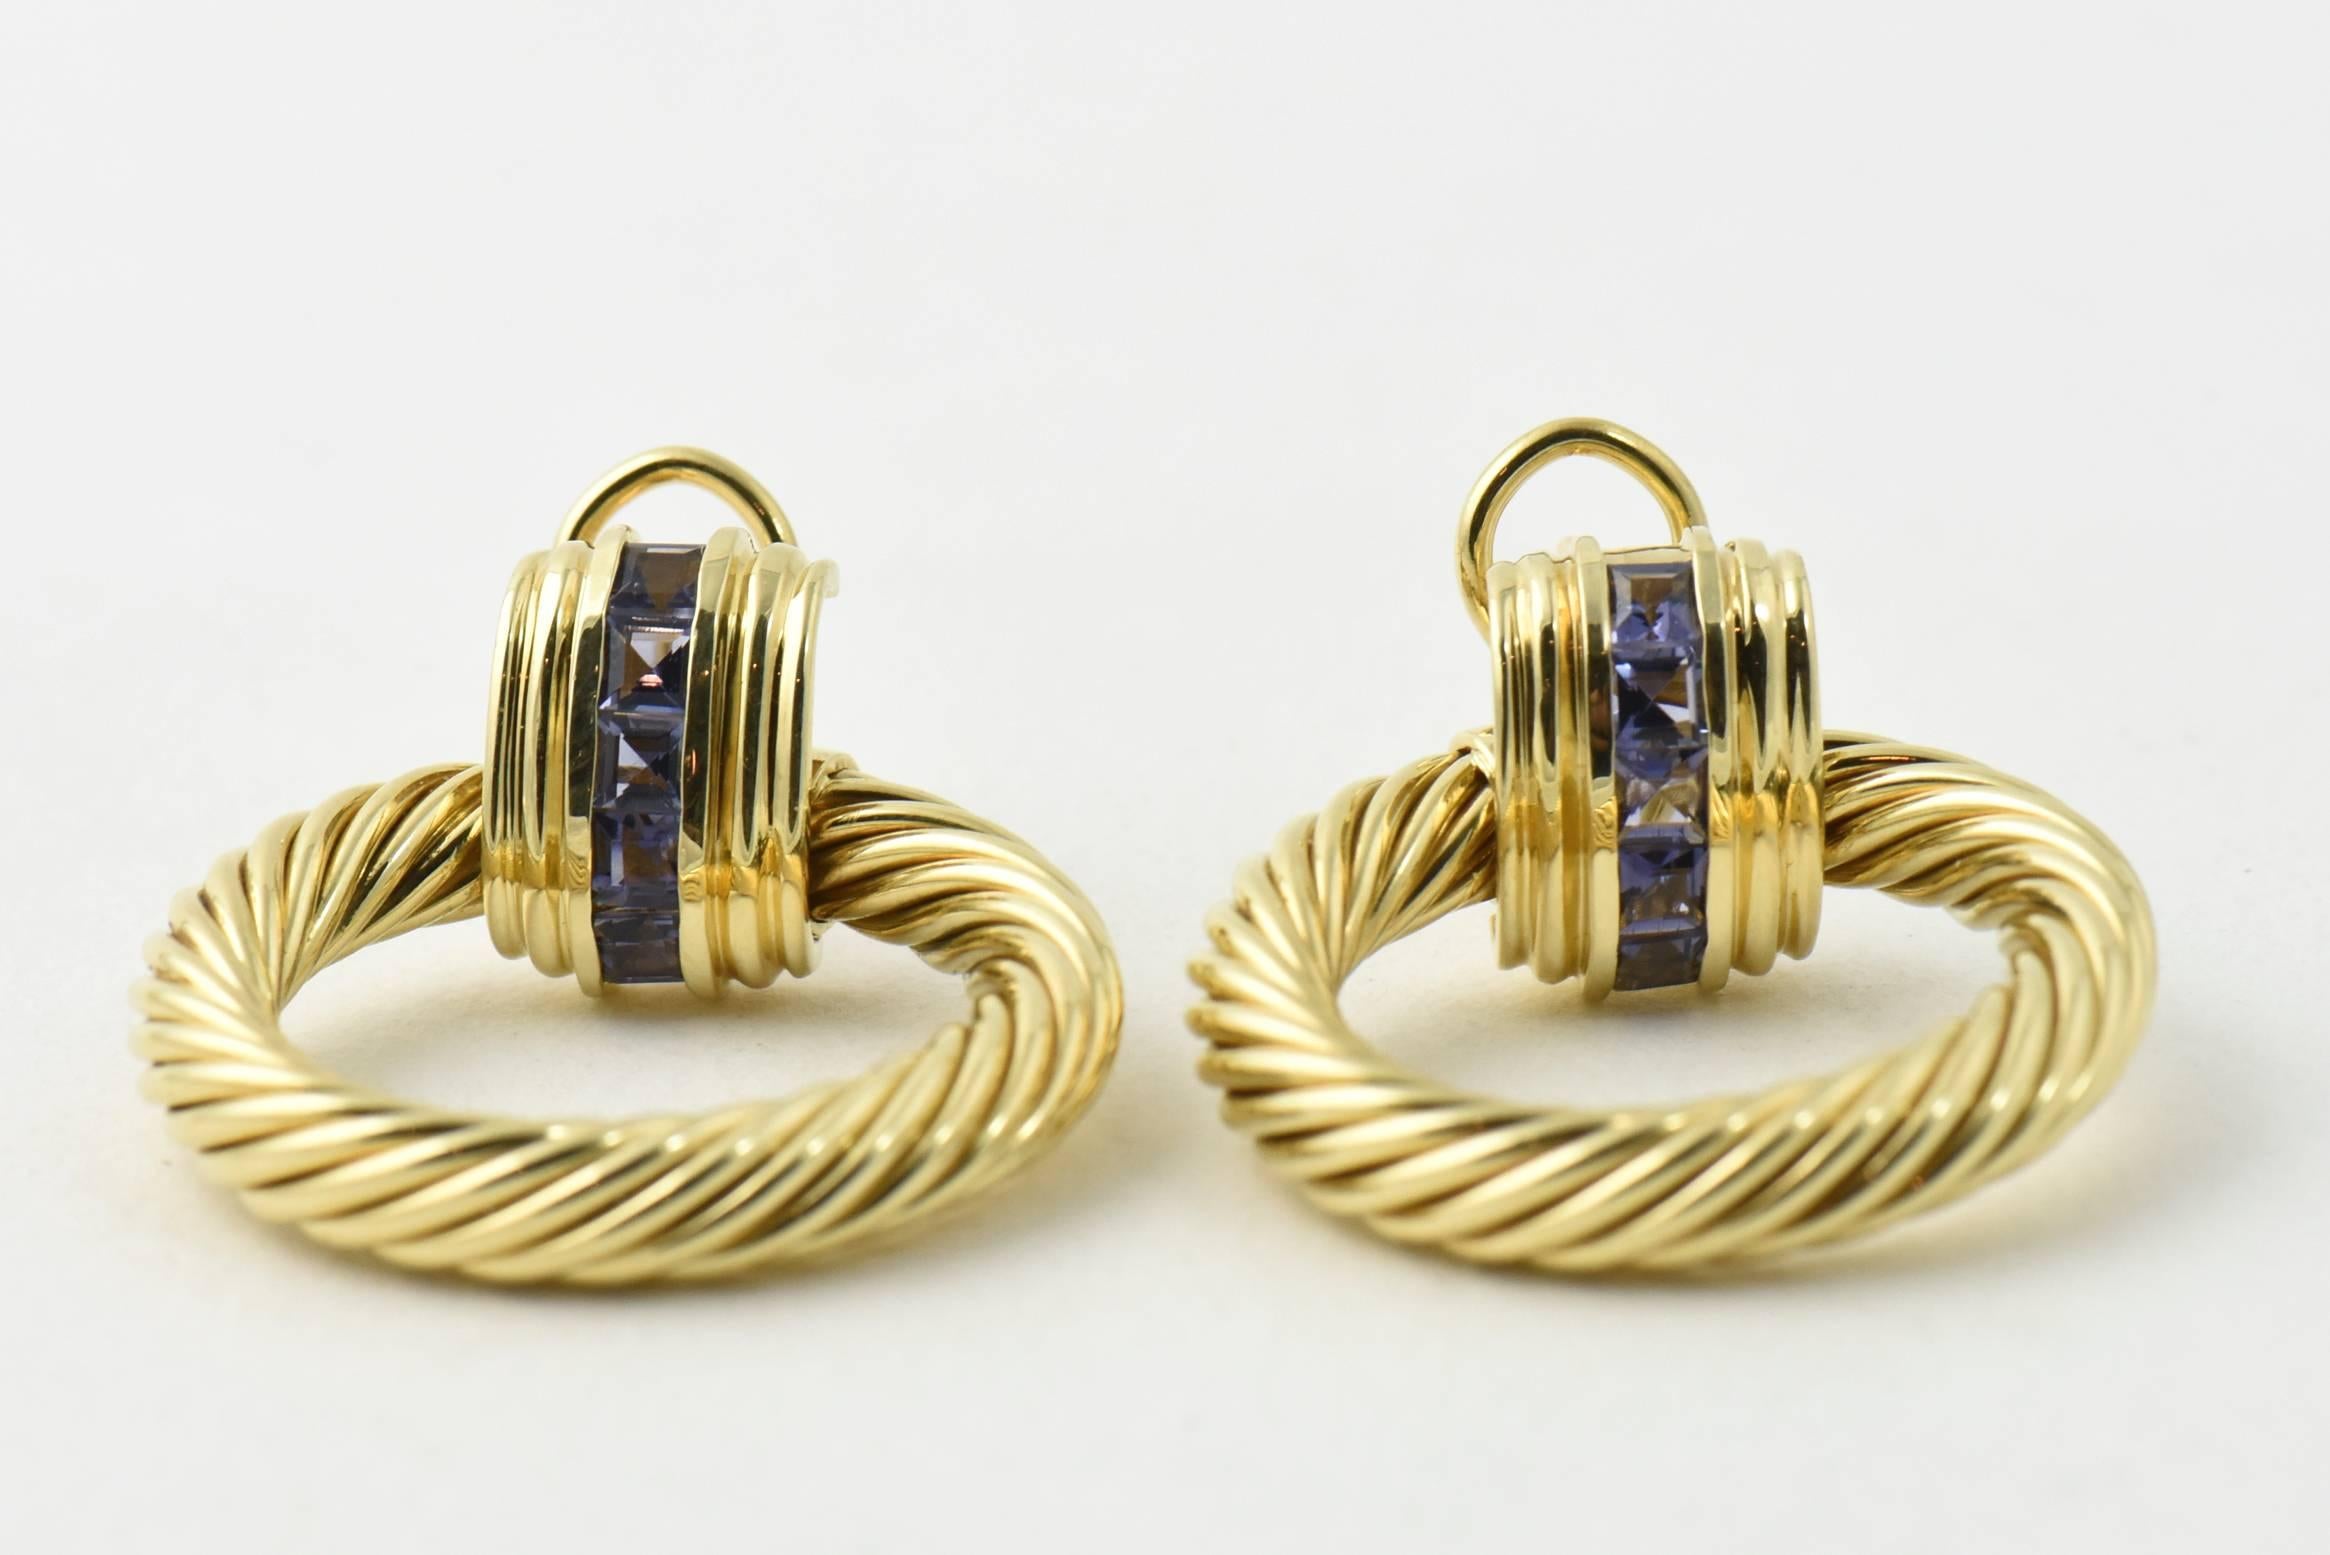 David Yurman Sapphire and Gold Cable Door Knocker Earrings with Detachable Hoops 3